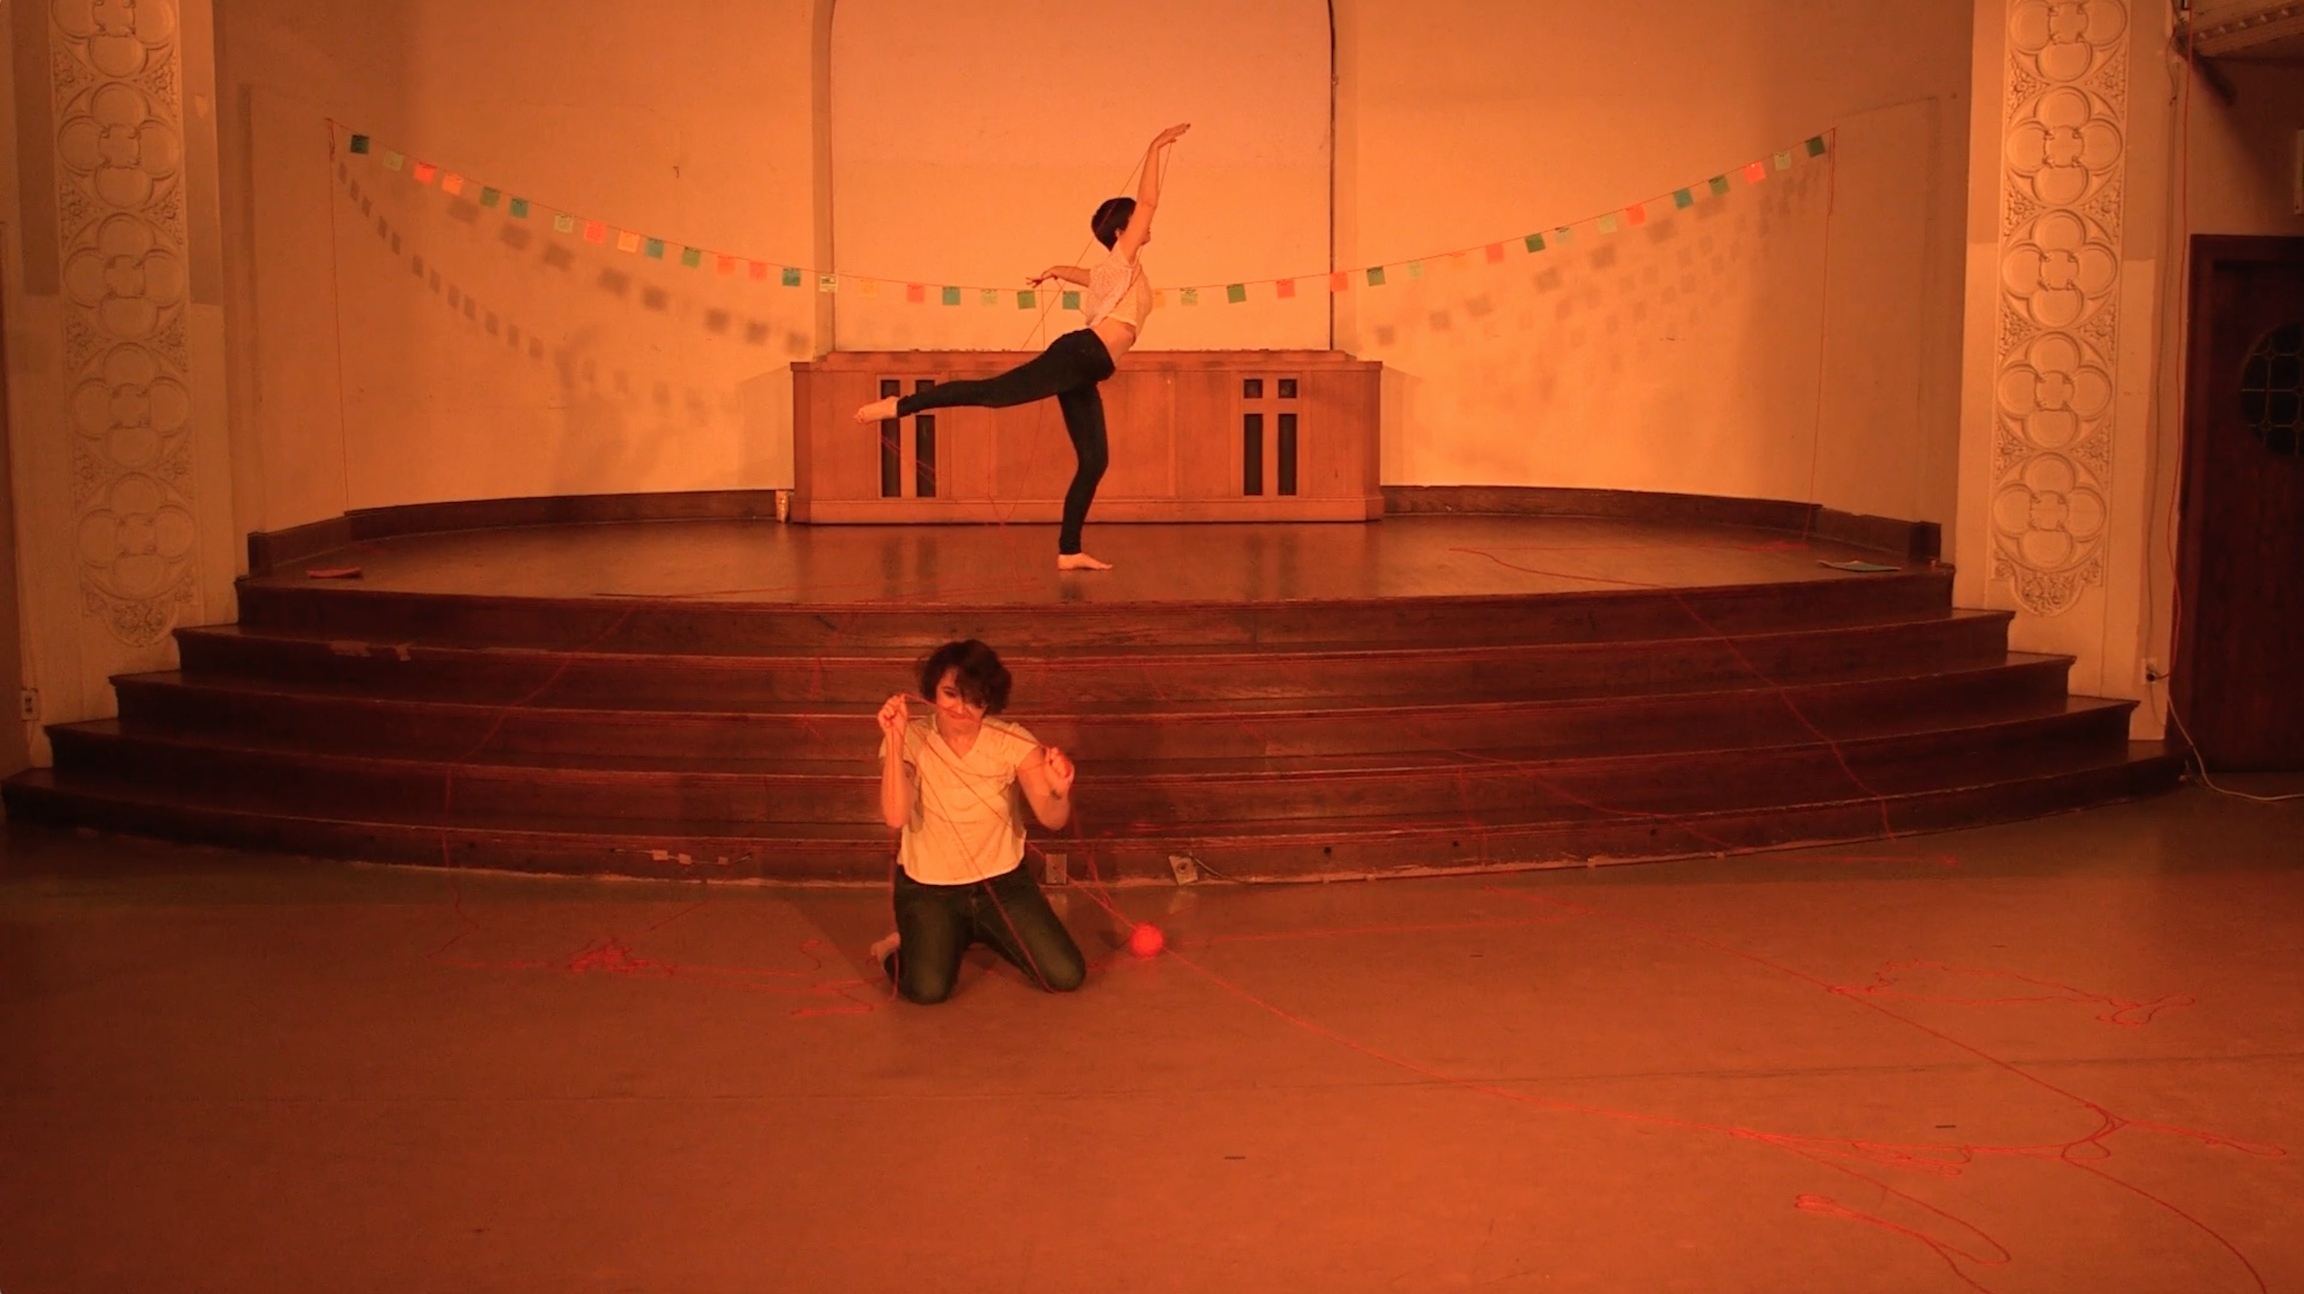 Image: Maggie Robinson and Allison Sokolowski performing in “I Am.” In the foreground, Maggie kneels on the floor, holding up strands of red yarn, which is also strewn across the floor. In the background, Allison stands onstage in an arabesque, also holding up red yarn. Both performers are barefoot and wear white t-shirts and jeans. The stage is bathed in warm orange light and has a string of colorful paper suspended across it. Still from a video by John Borowski.